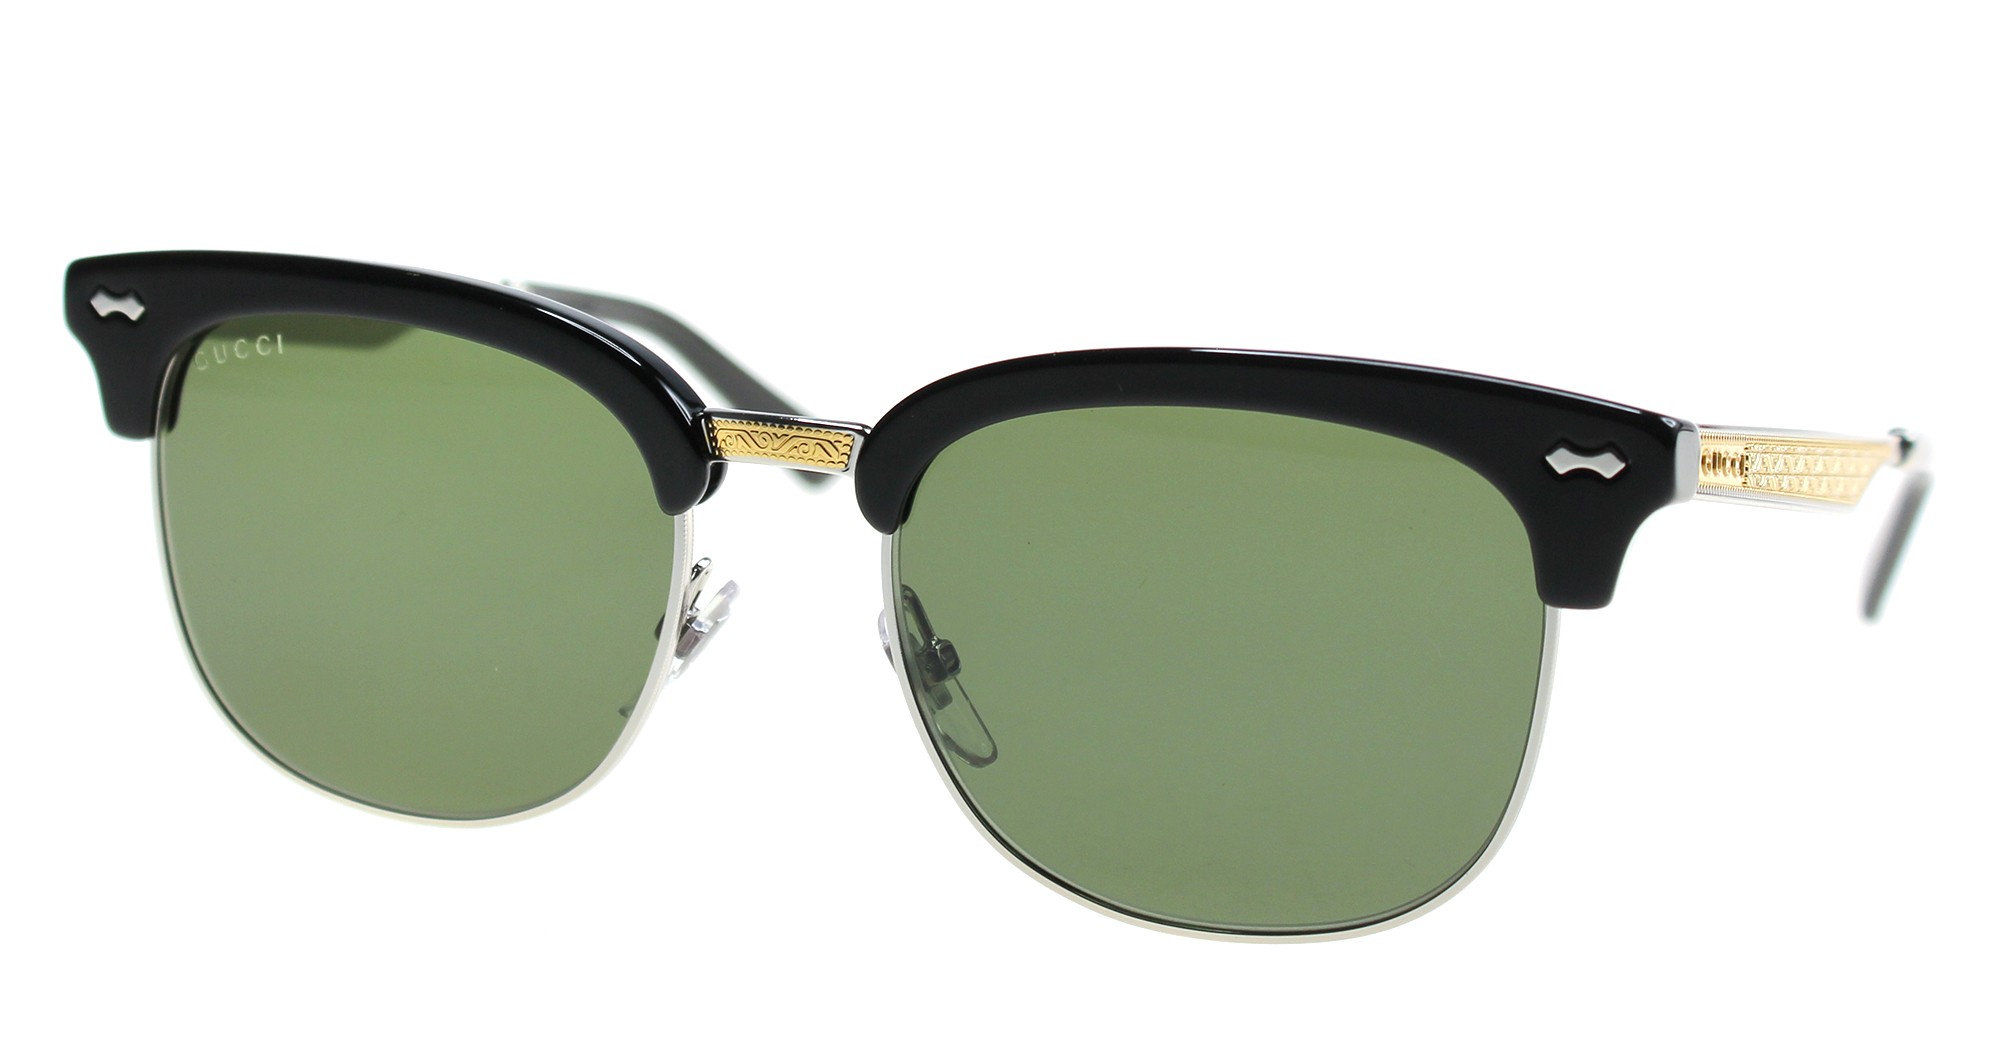 Gucci Sunglasses GG 0051/S - Oval - Styles - Eyewear Connection